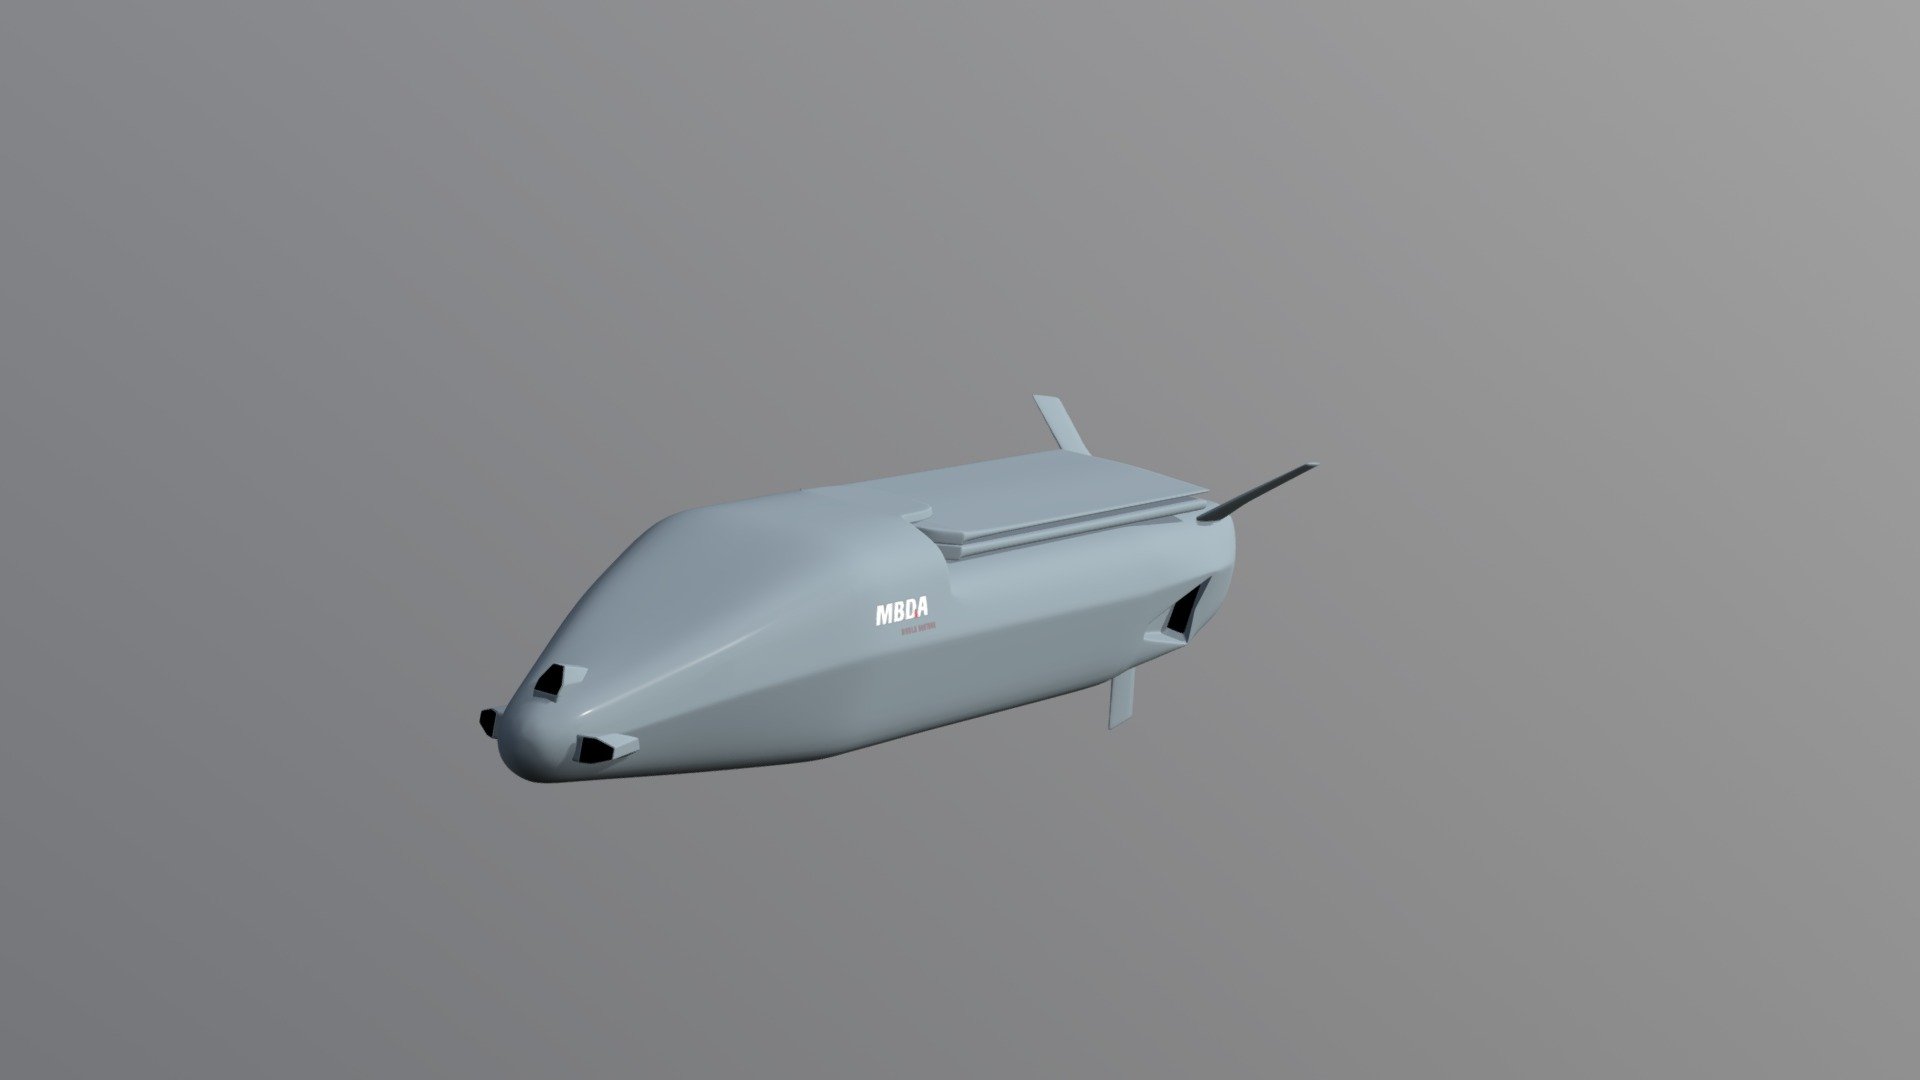 A new category of weapon from MBDA is ‘Remote Carriers’, various air-launched autonomous platforms that deliver multiple effects, whether lethal or non-lethal, as well as new services for munitions such as intelligence, targeting, and deception of enemy sensors.
Such remote carriers would function as baits and decoys, carry additional weapons ahead of the manned aircraft and closer to heavily defended targets, collect ISR or establish communications nodes.
The RC100 is a derivative of the Smart Glider and has the same dimensions and weight, 1.8 meters and 120 kg respectively.
Being an expendable system cost is obviously an issue thus passive and active payloads installed will have to take that parameter into consideration.

(Additional information about the model is on my page in ArtStation) - MBDA Remote Carrier 100 - 3D model by Akela Freedom (@AkelaFreedom) 3d model